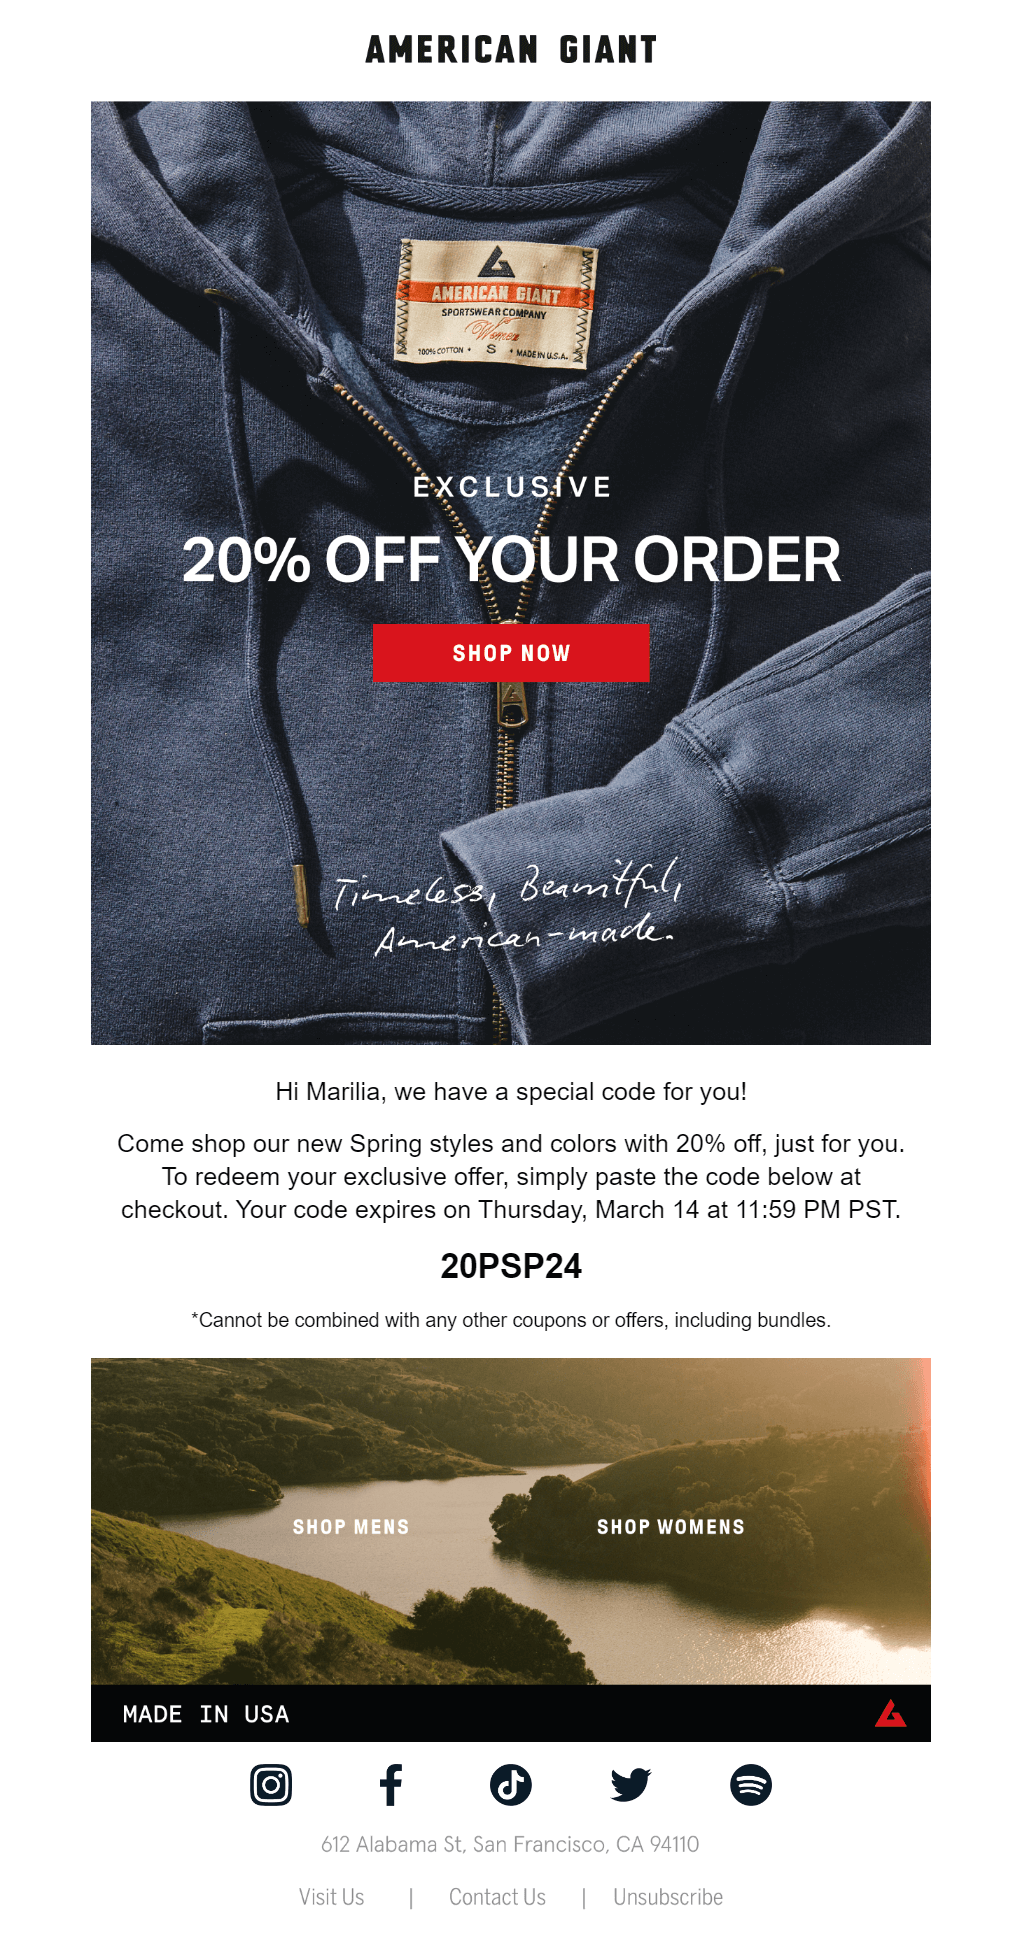 american giant offer email type